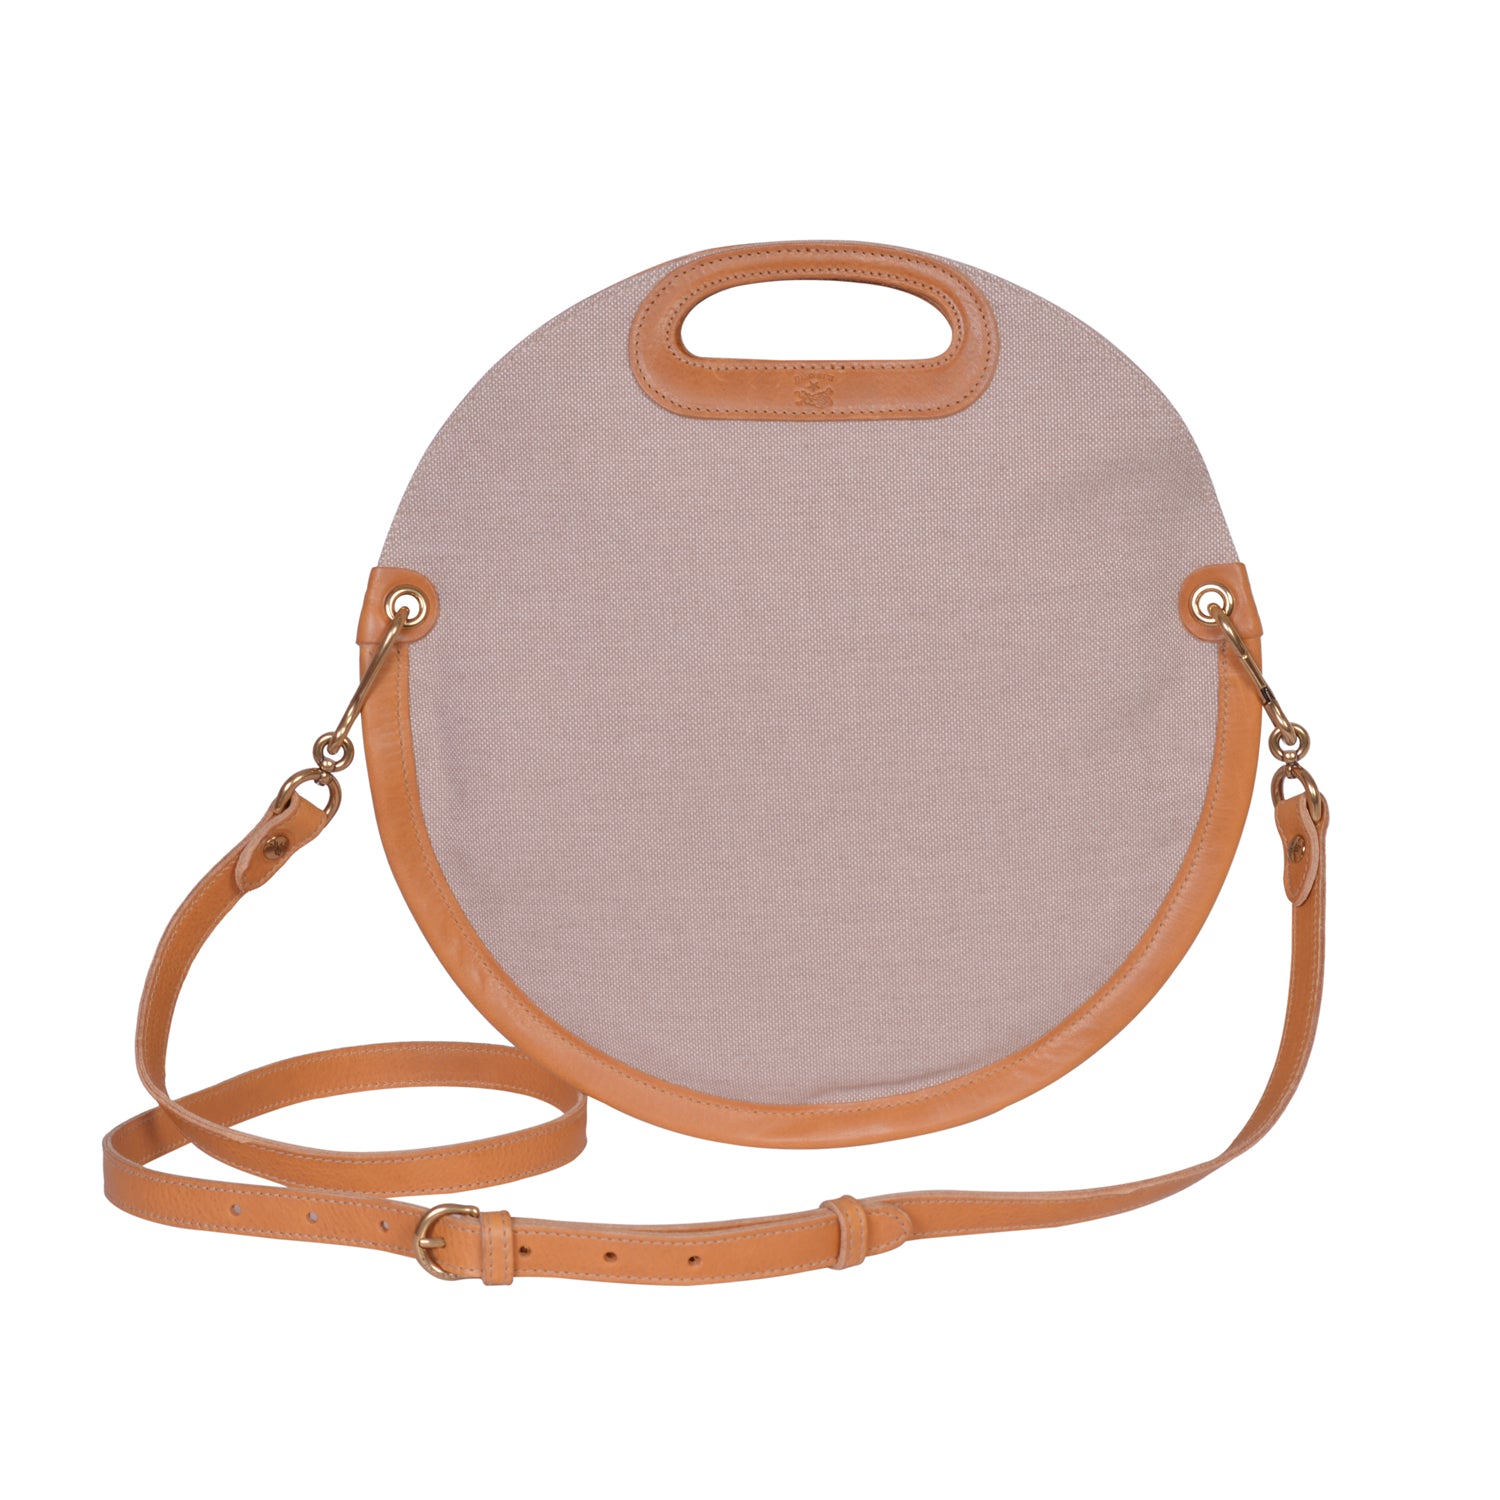 IL BISONTE  CASUAL WOMEN'S CIRCULAR HANDBAG IN NATURAL TECHNICAL FABRIC